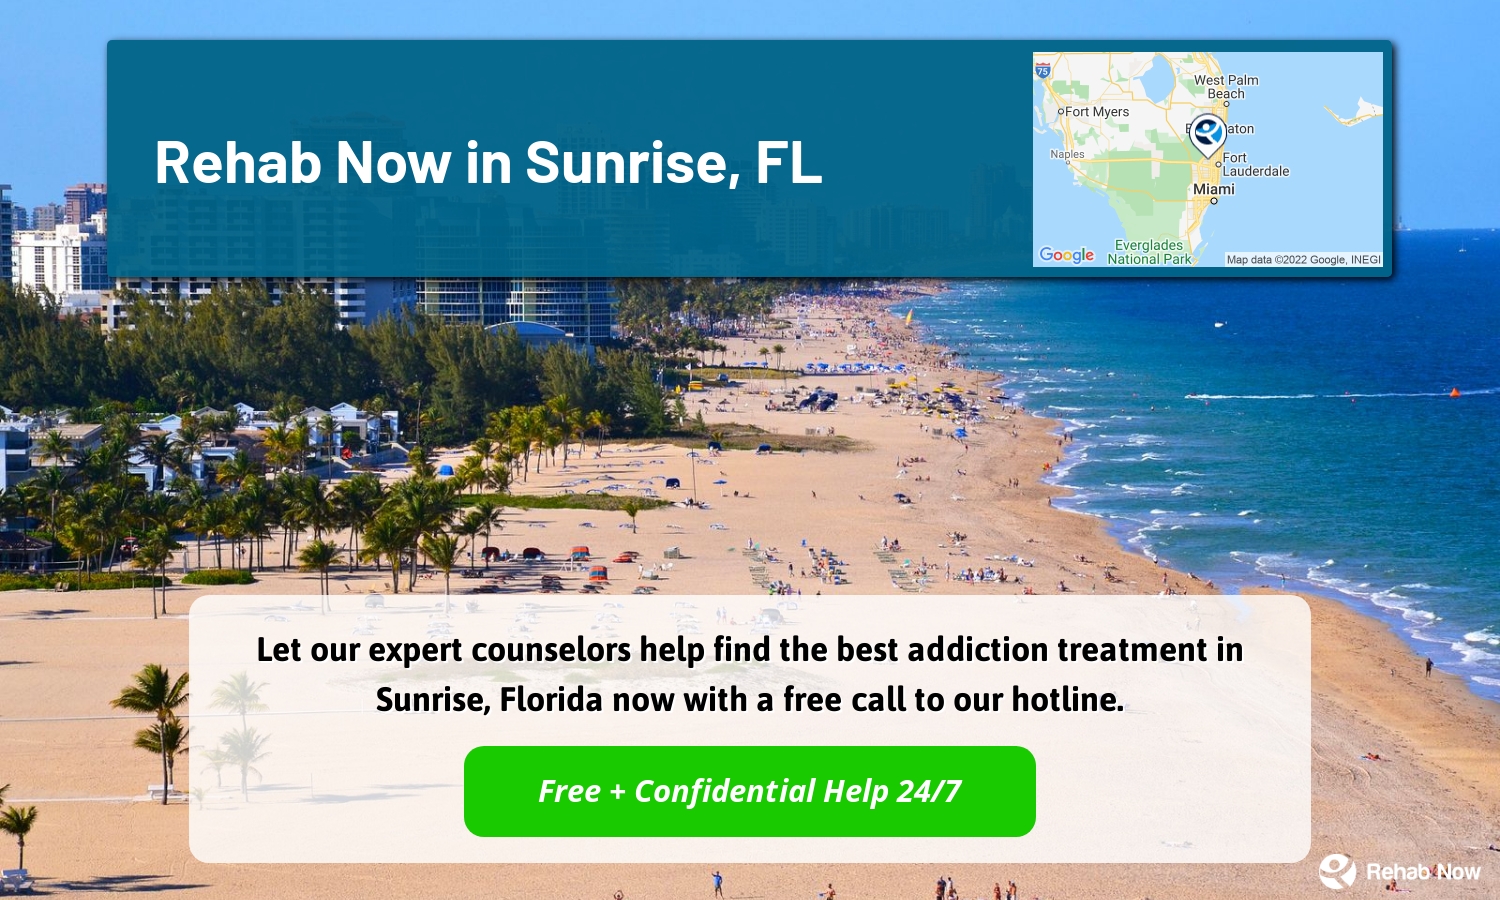 Let our expert counselors help find the best addiction treatment in Sunrise, Florida now with a free call to our hotline.